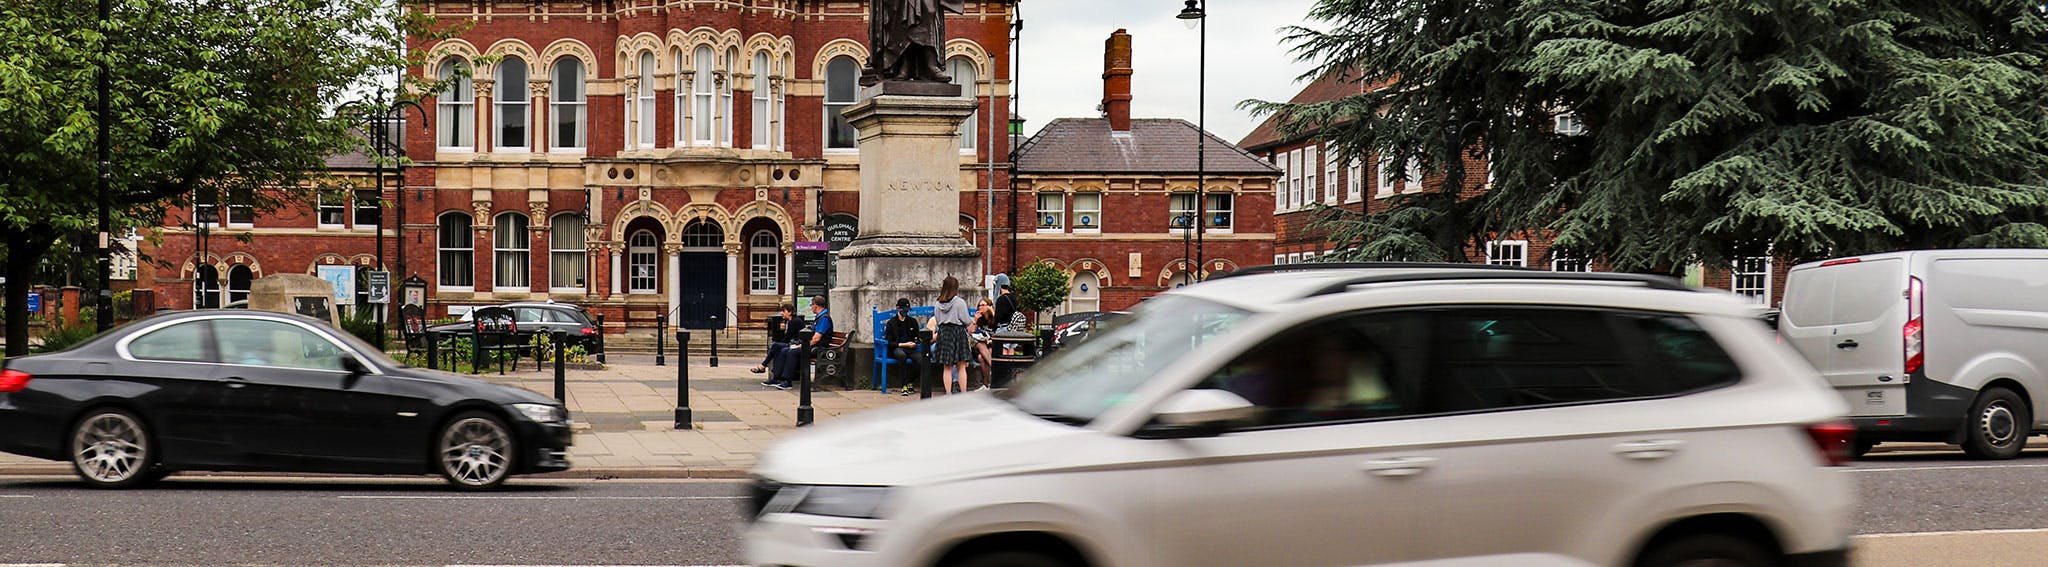 Street scene in the centre of Grantham with cars and people